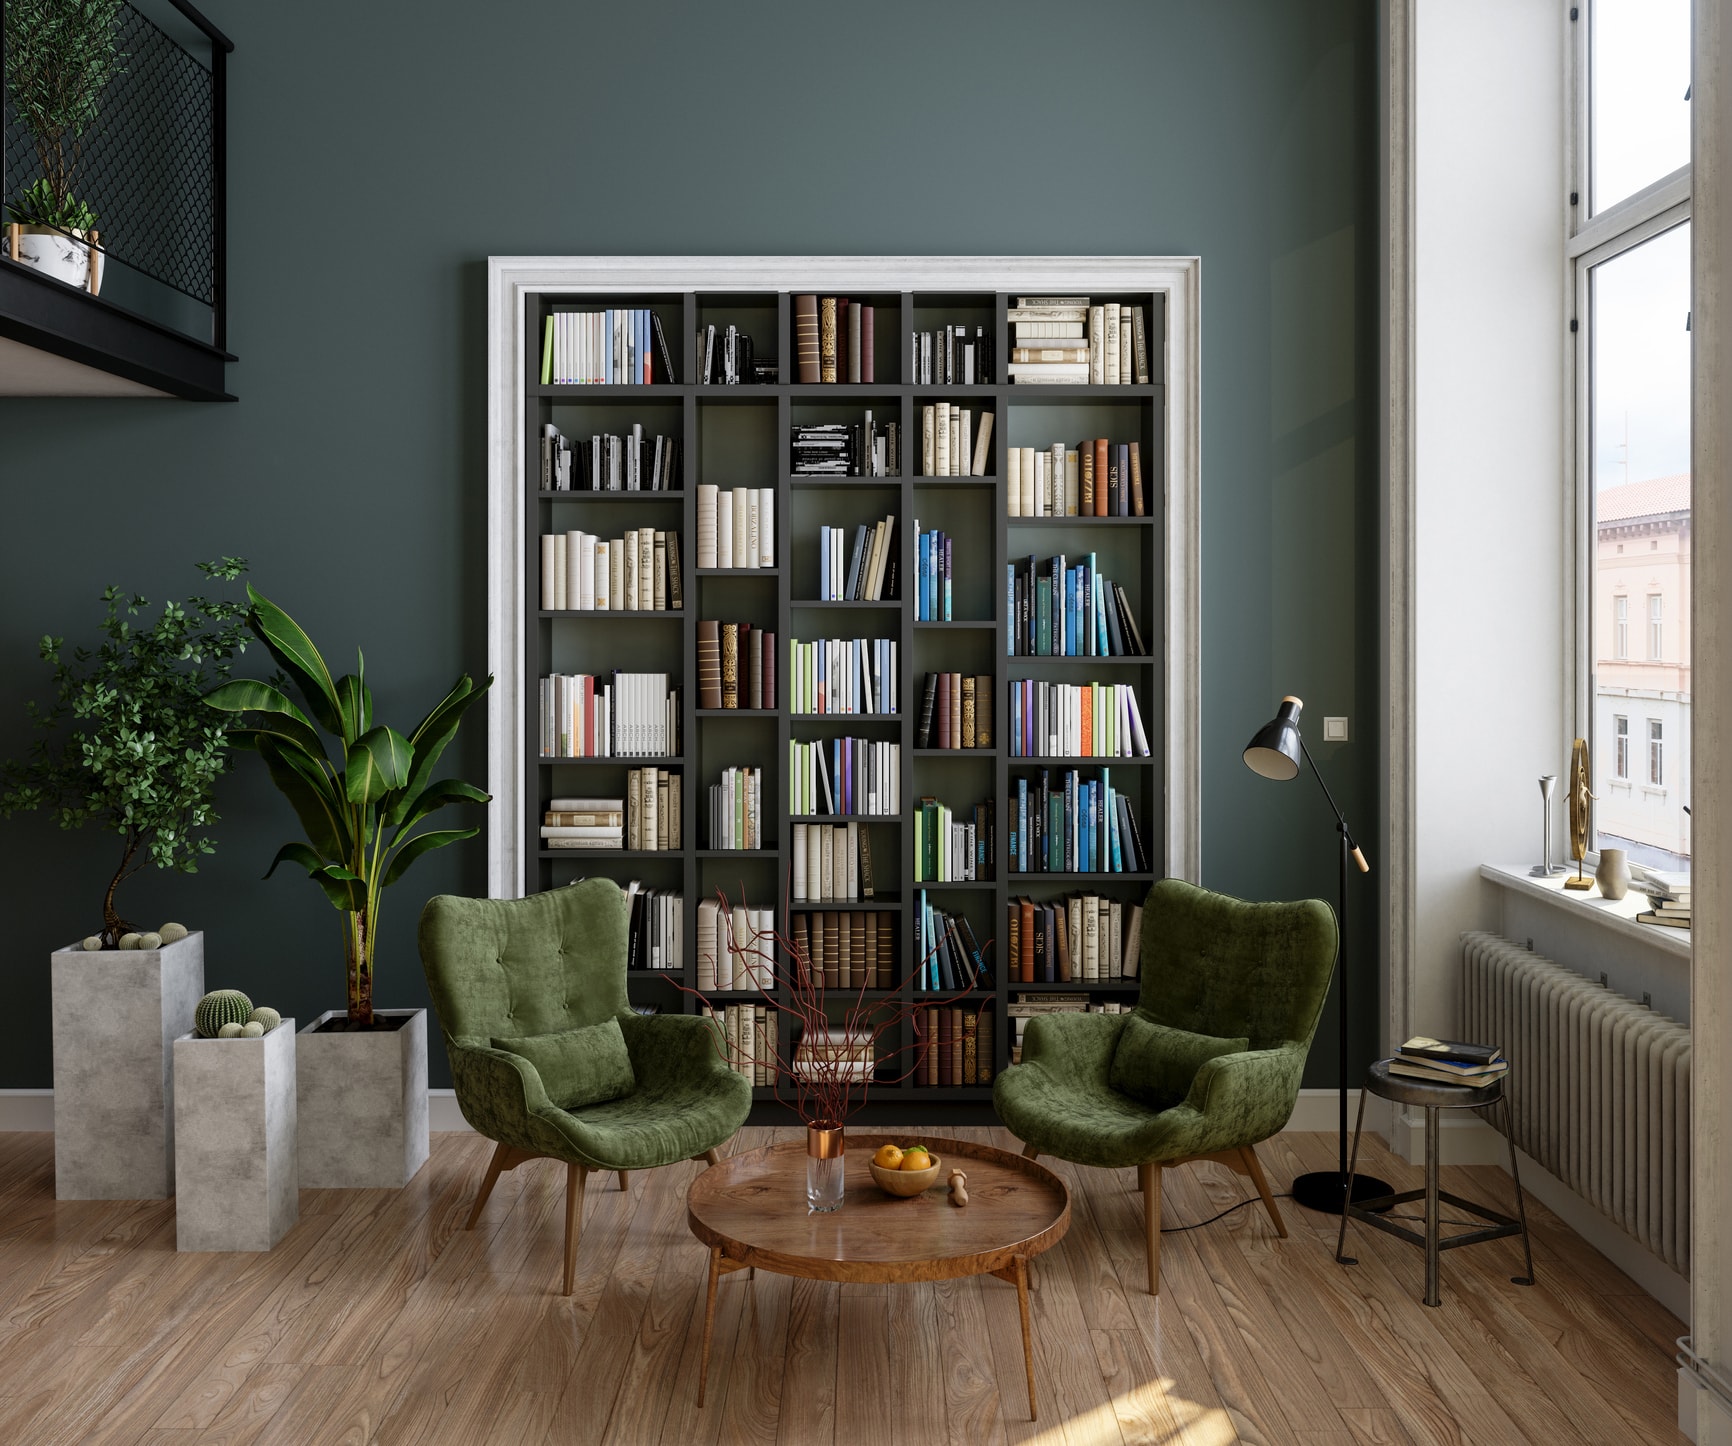 Living room with a big bookshelf and eclectic decor